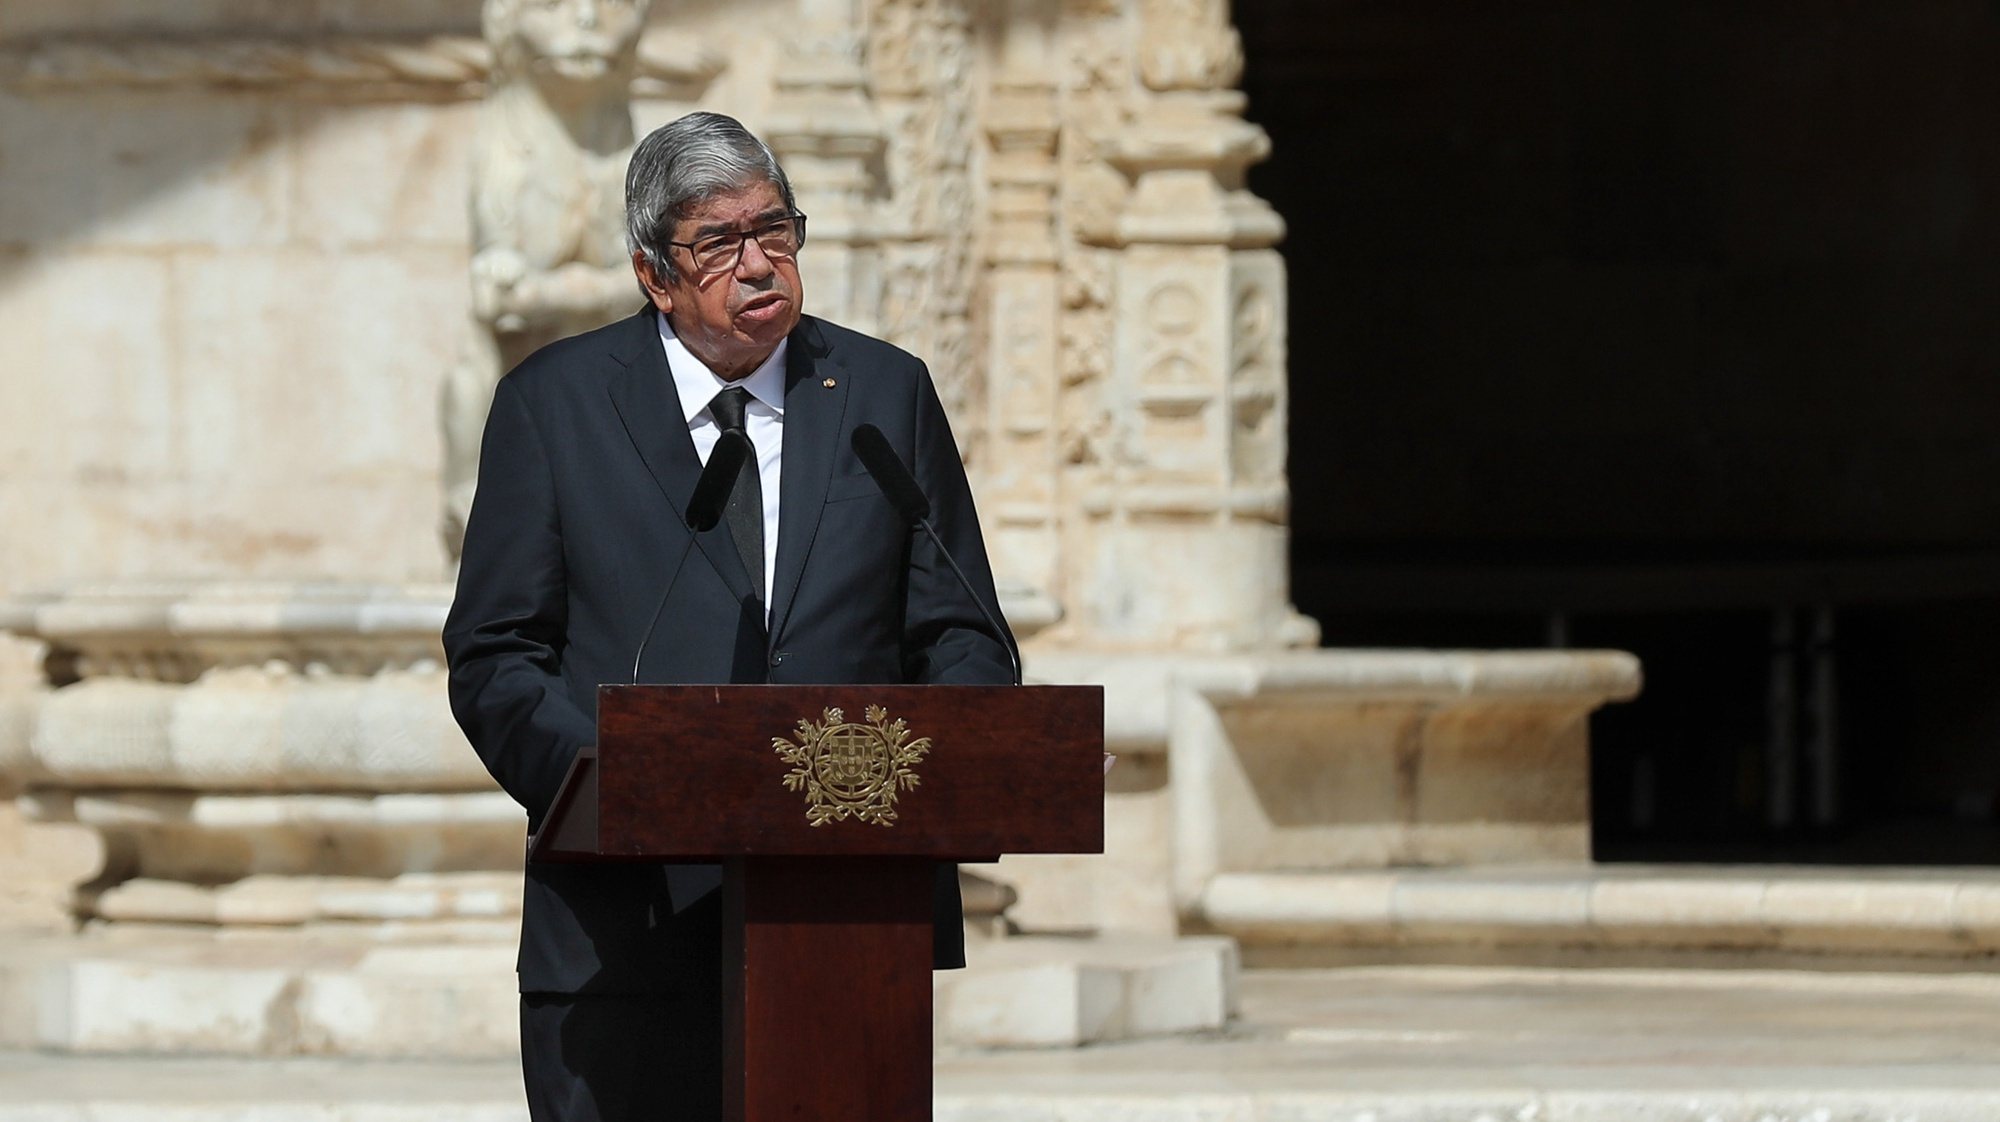 President of the Assembly of the Republic, Ferro Rodrigues during the funeral service for the late Portuguese President Jorge Sampaio at Jeronimos Monastery, Portugal, 12 september 2021. Jorge Sampaio, former secretary-general of the PS (1989/1992) and two-term President of the Republic (1996/2006), died on Friday, at the age of 81, at Santa Cruz Hospital, in Lisbon, where he had been hospitalized since August 27, following respiratory difficulties. MIGUEL A. LOPES//LUSA